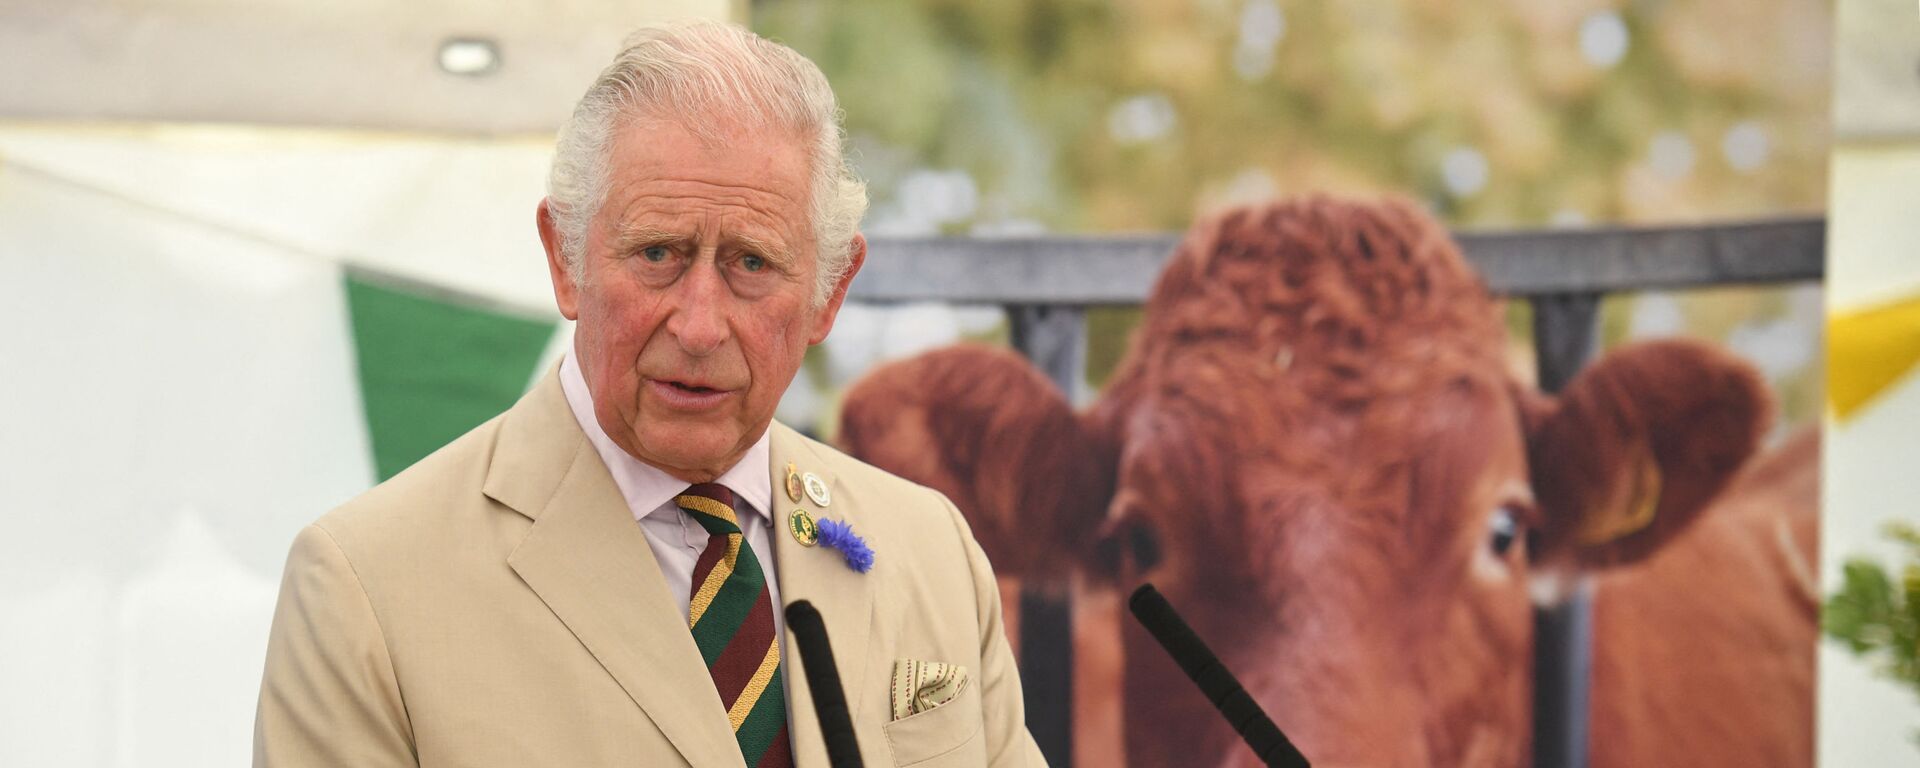 Britain's Prince Charles, Prince of Wales makes a speech during his visit to the Great Yorkshire Show in Harrogate, northern England on July 15, 2021. - Sputnik International, 1920, 16.07.2021